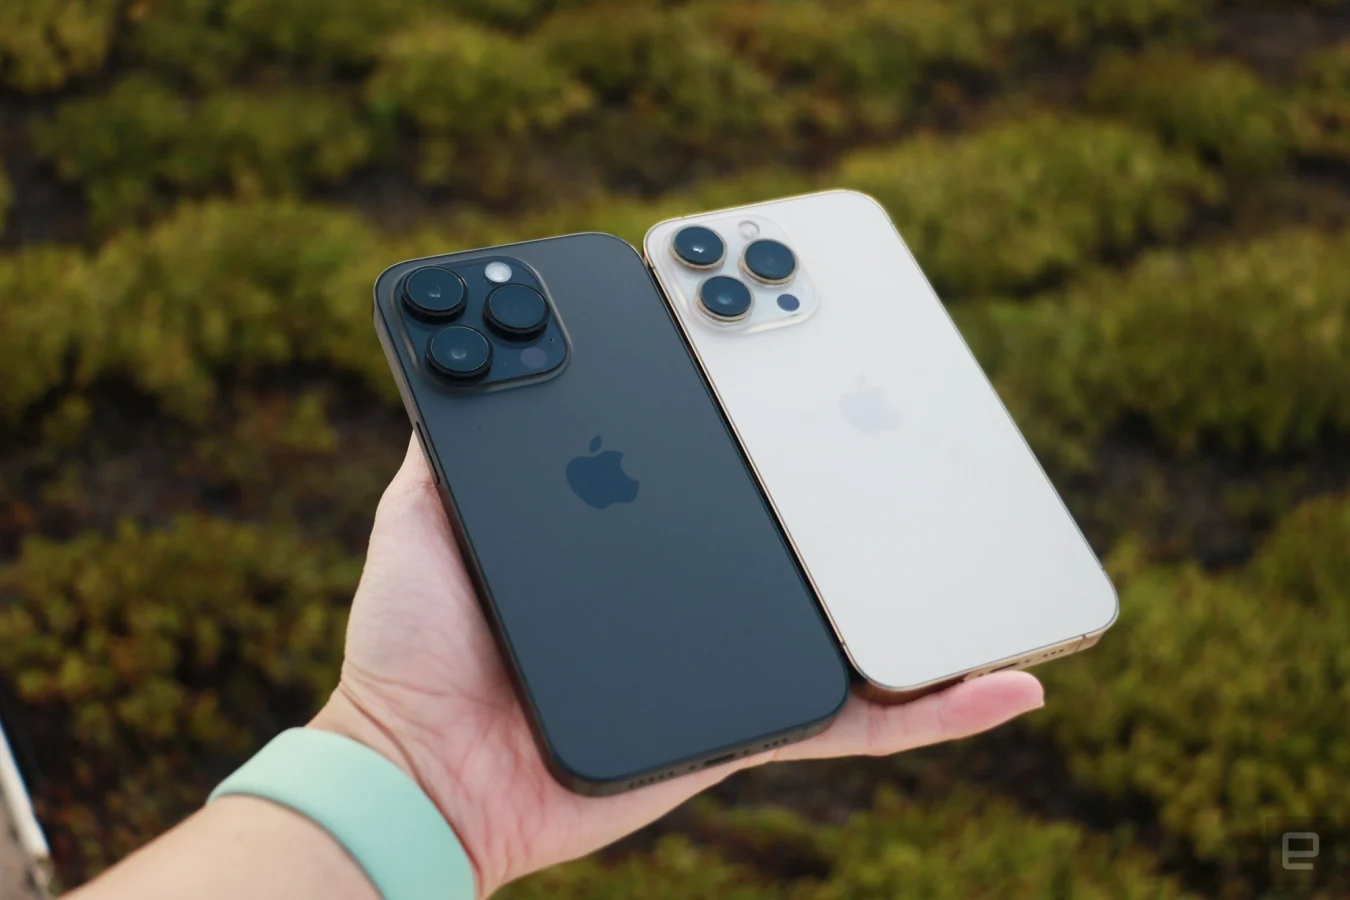 A black iPhone 14 Pro and gold iPhone 13 Pro held next to each other in one hand, against a background of green leaves.